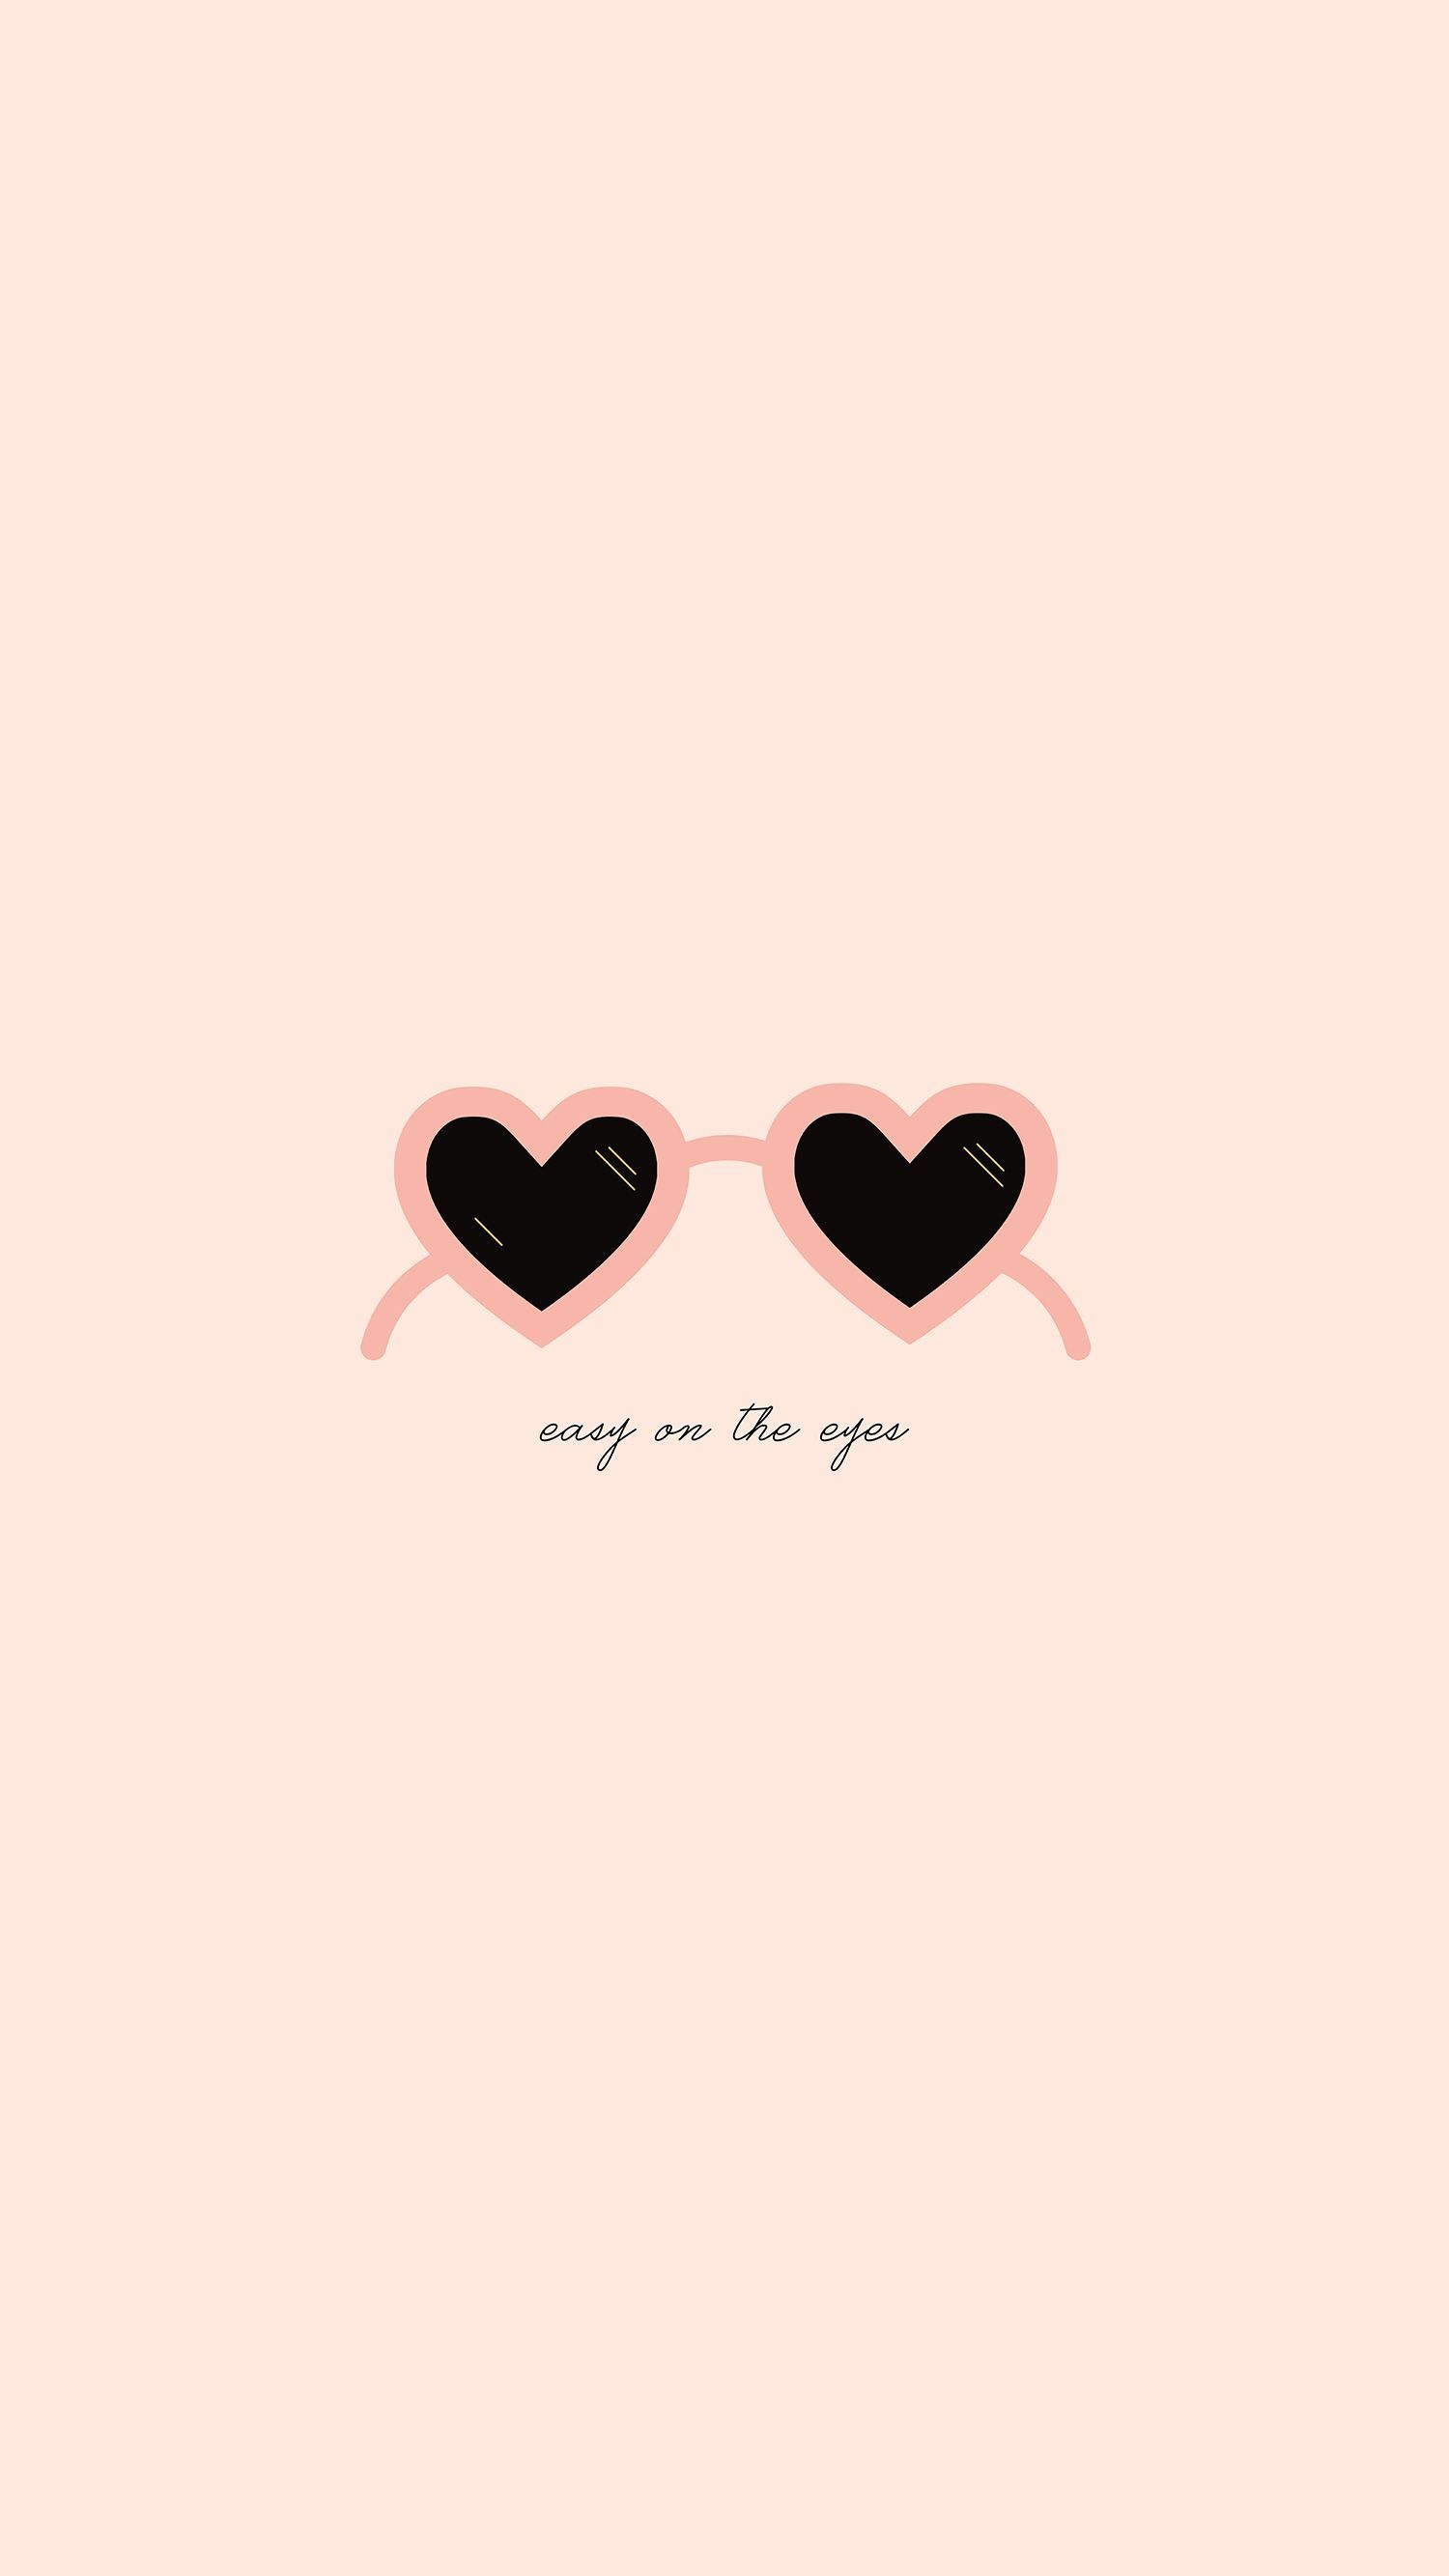 A pink background with black hearts and sunglasses - Valentine's Day